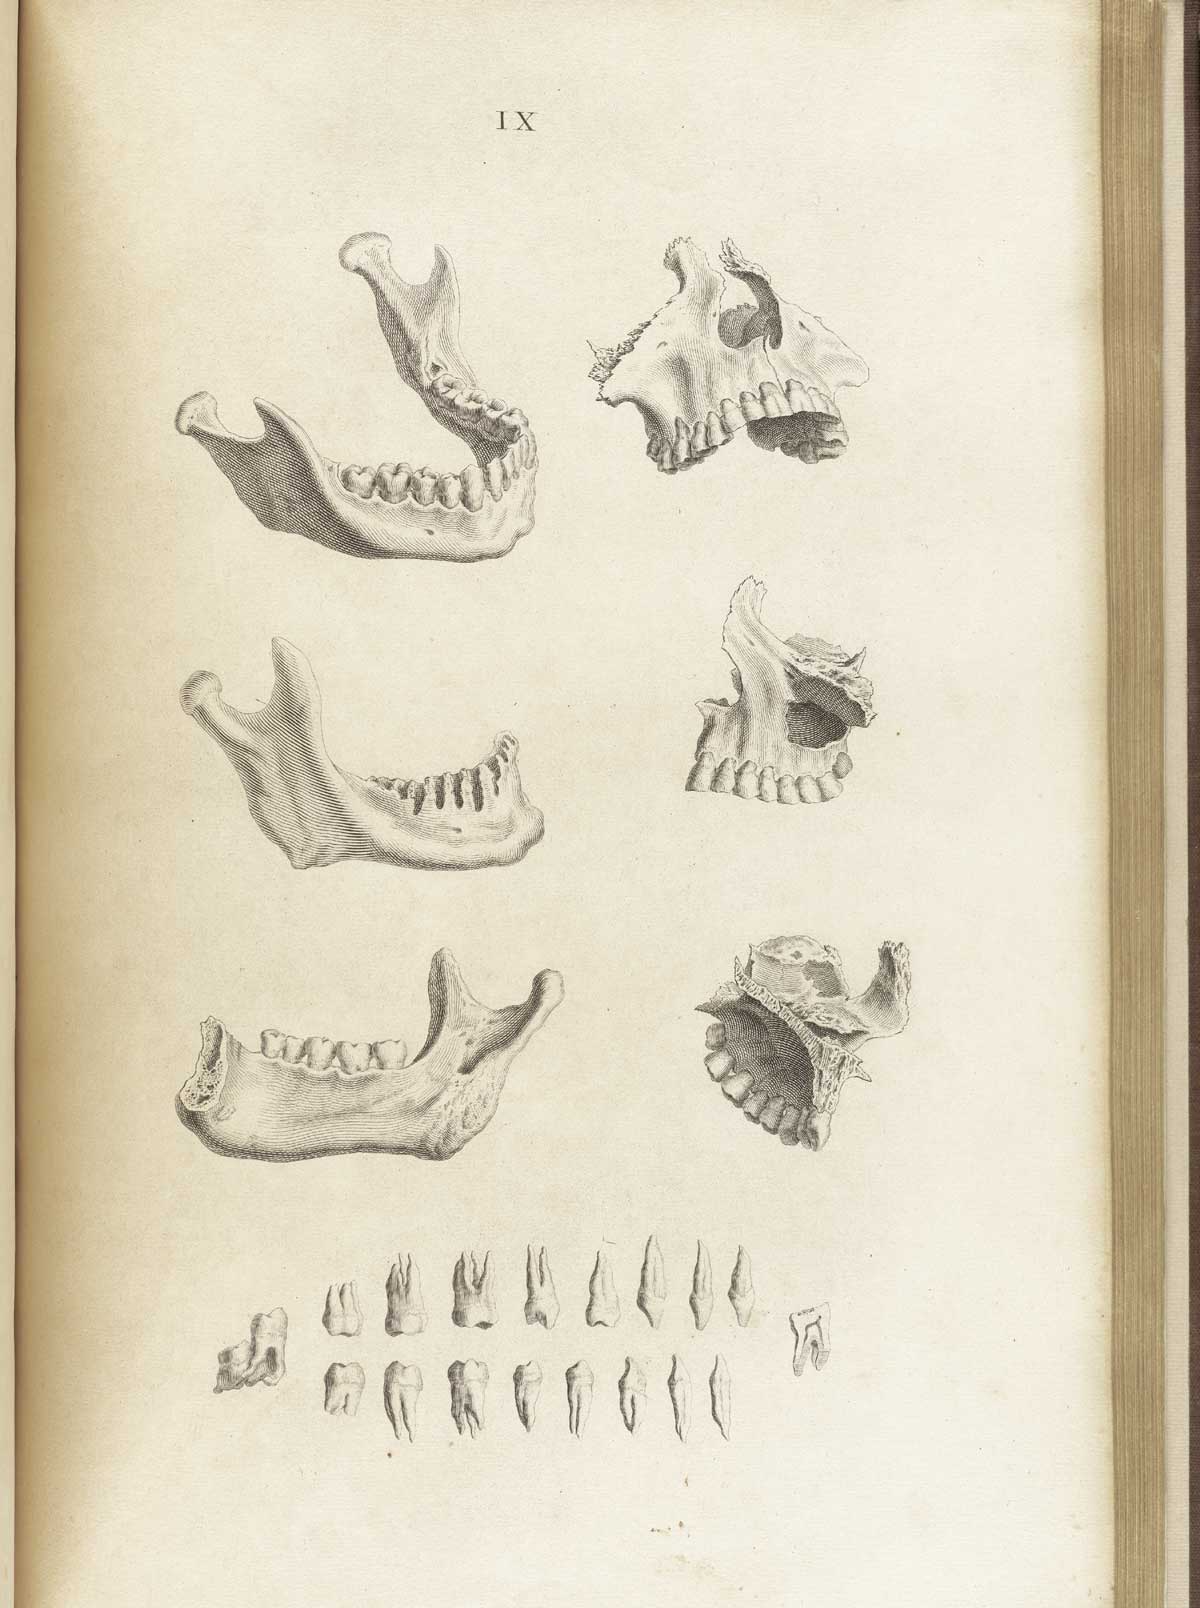 Engraving of three views of the mandible, three views of the maxilla, and 18 views of the teeth, including the cross-section of a molar, from William Cheselden’s Osteographia, NLM Call no.: WZ 260 C499o 1733.